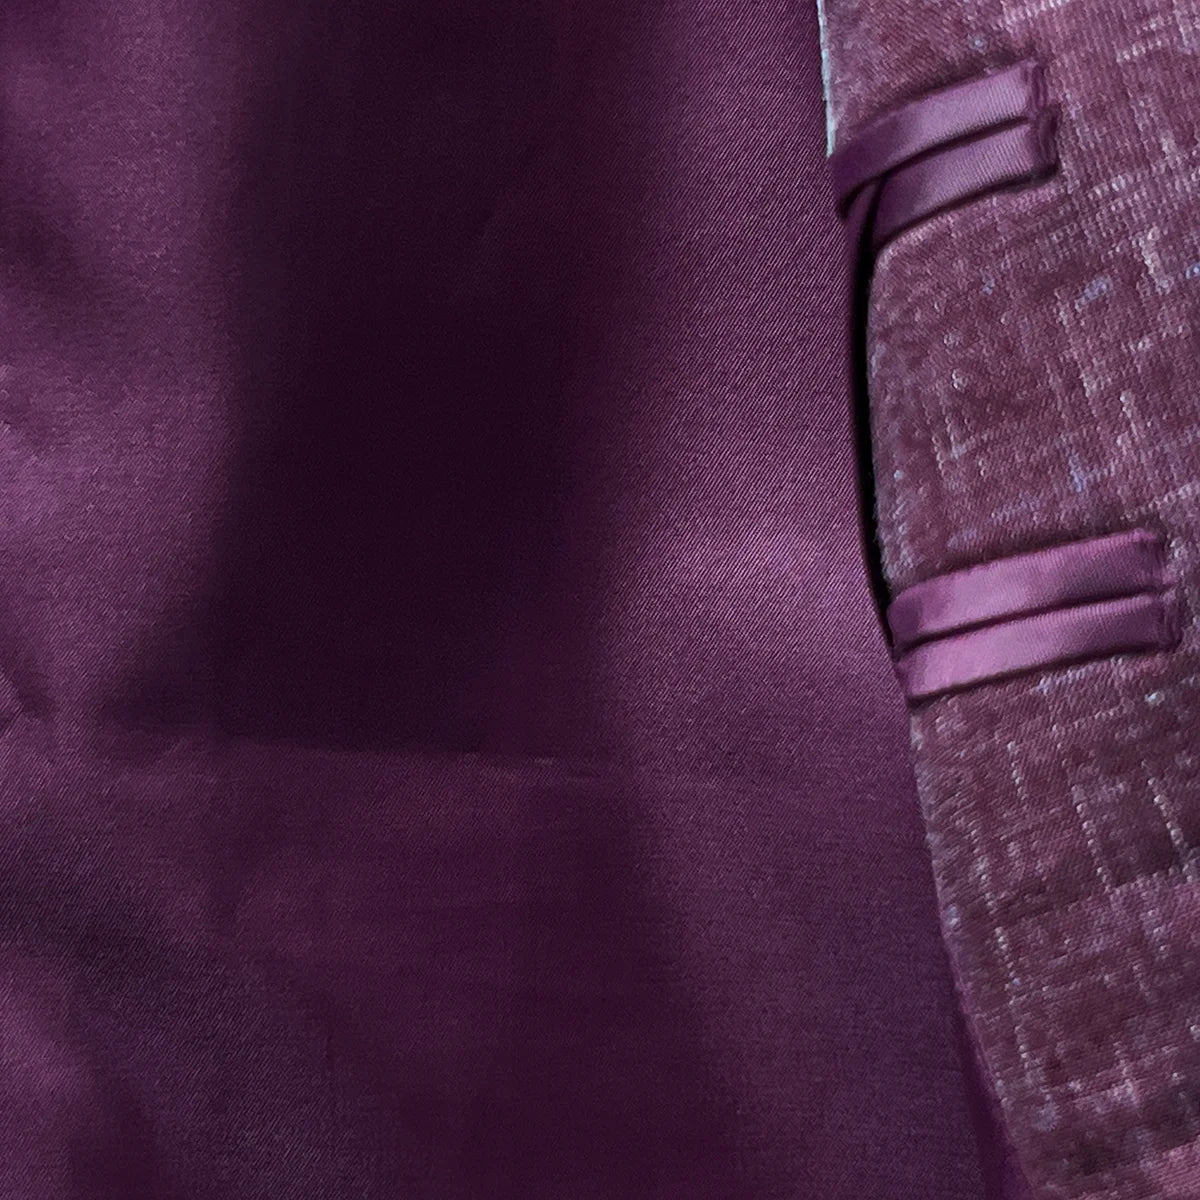 Maroon bemberg silk lining inside a cranberry men's suit by Westwood Hart, ensuring comfort and luxury.